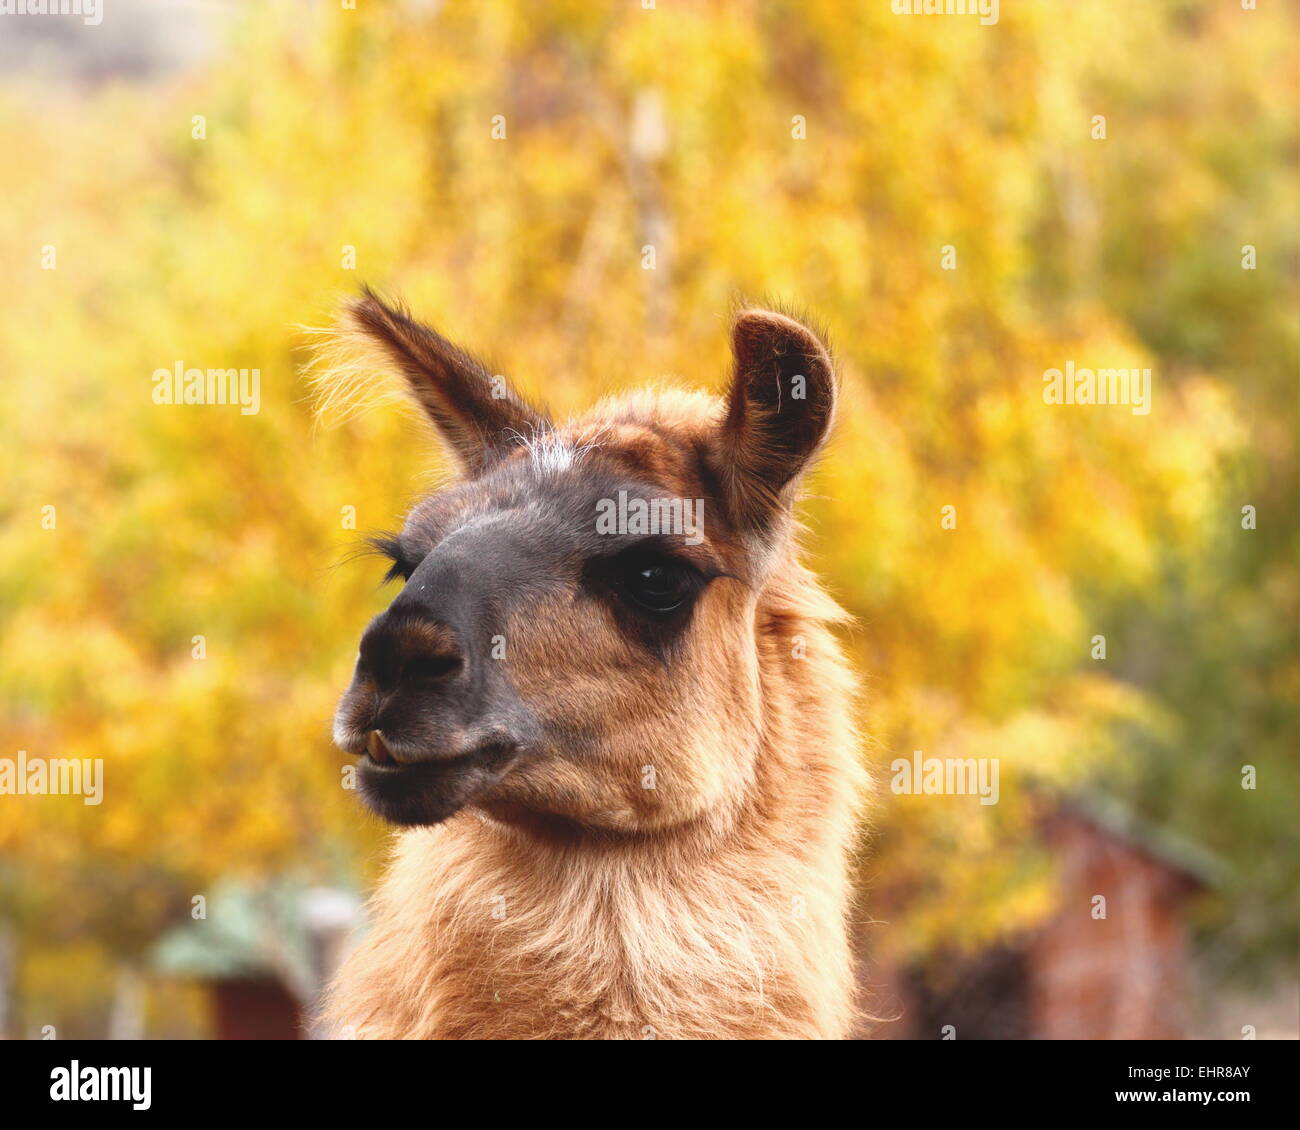 cute portrait of brown spitting llama over autumn forest background Stock Photo